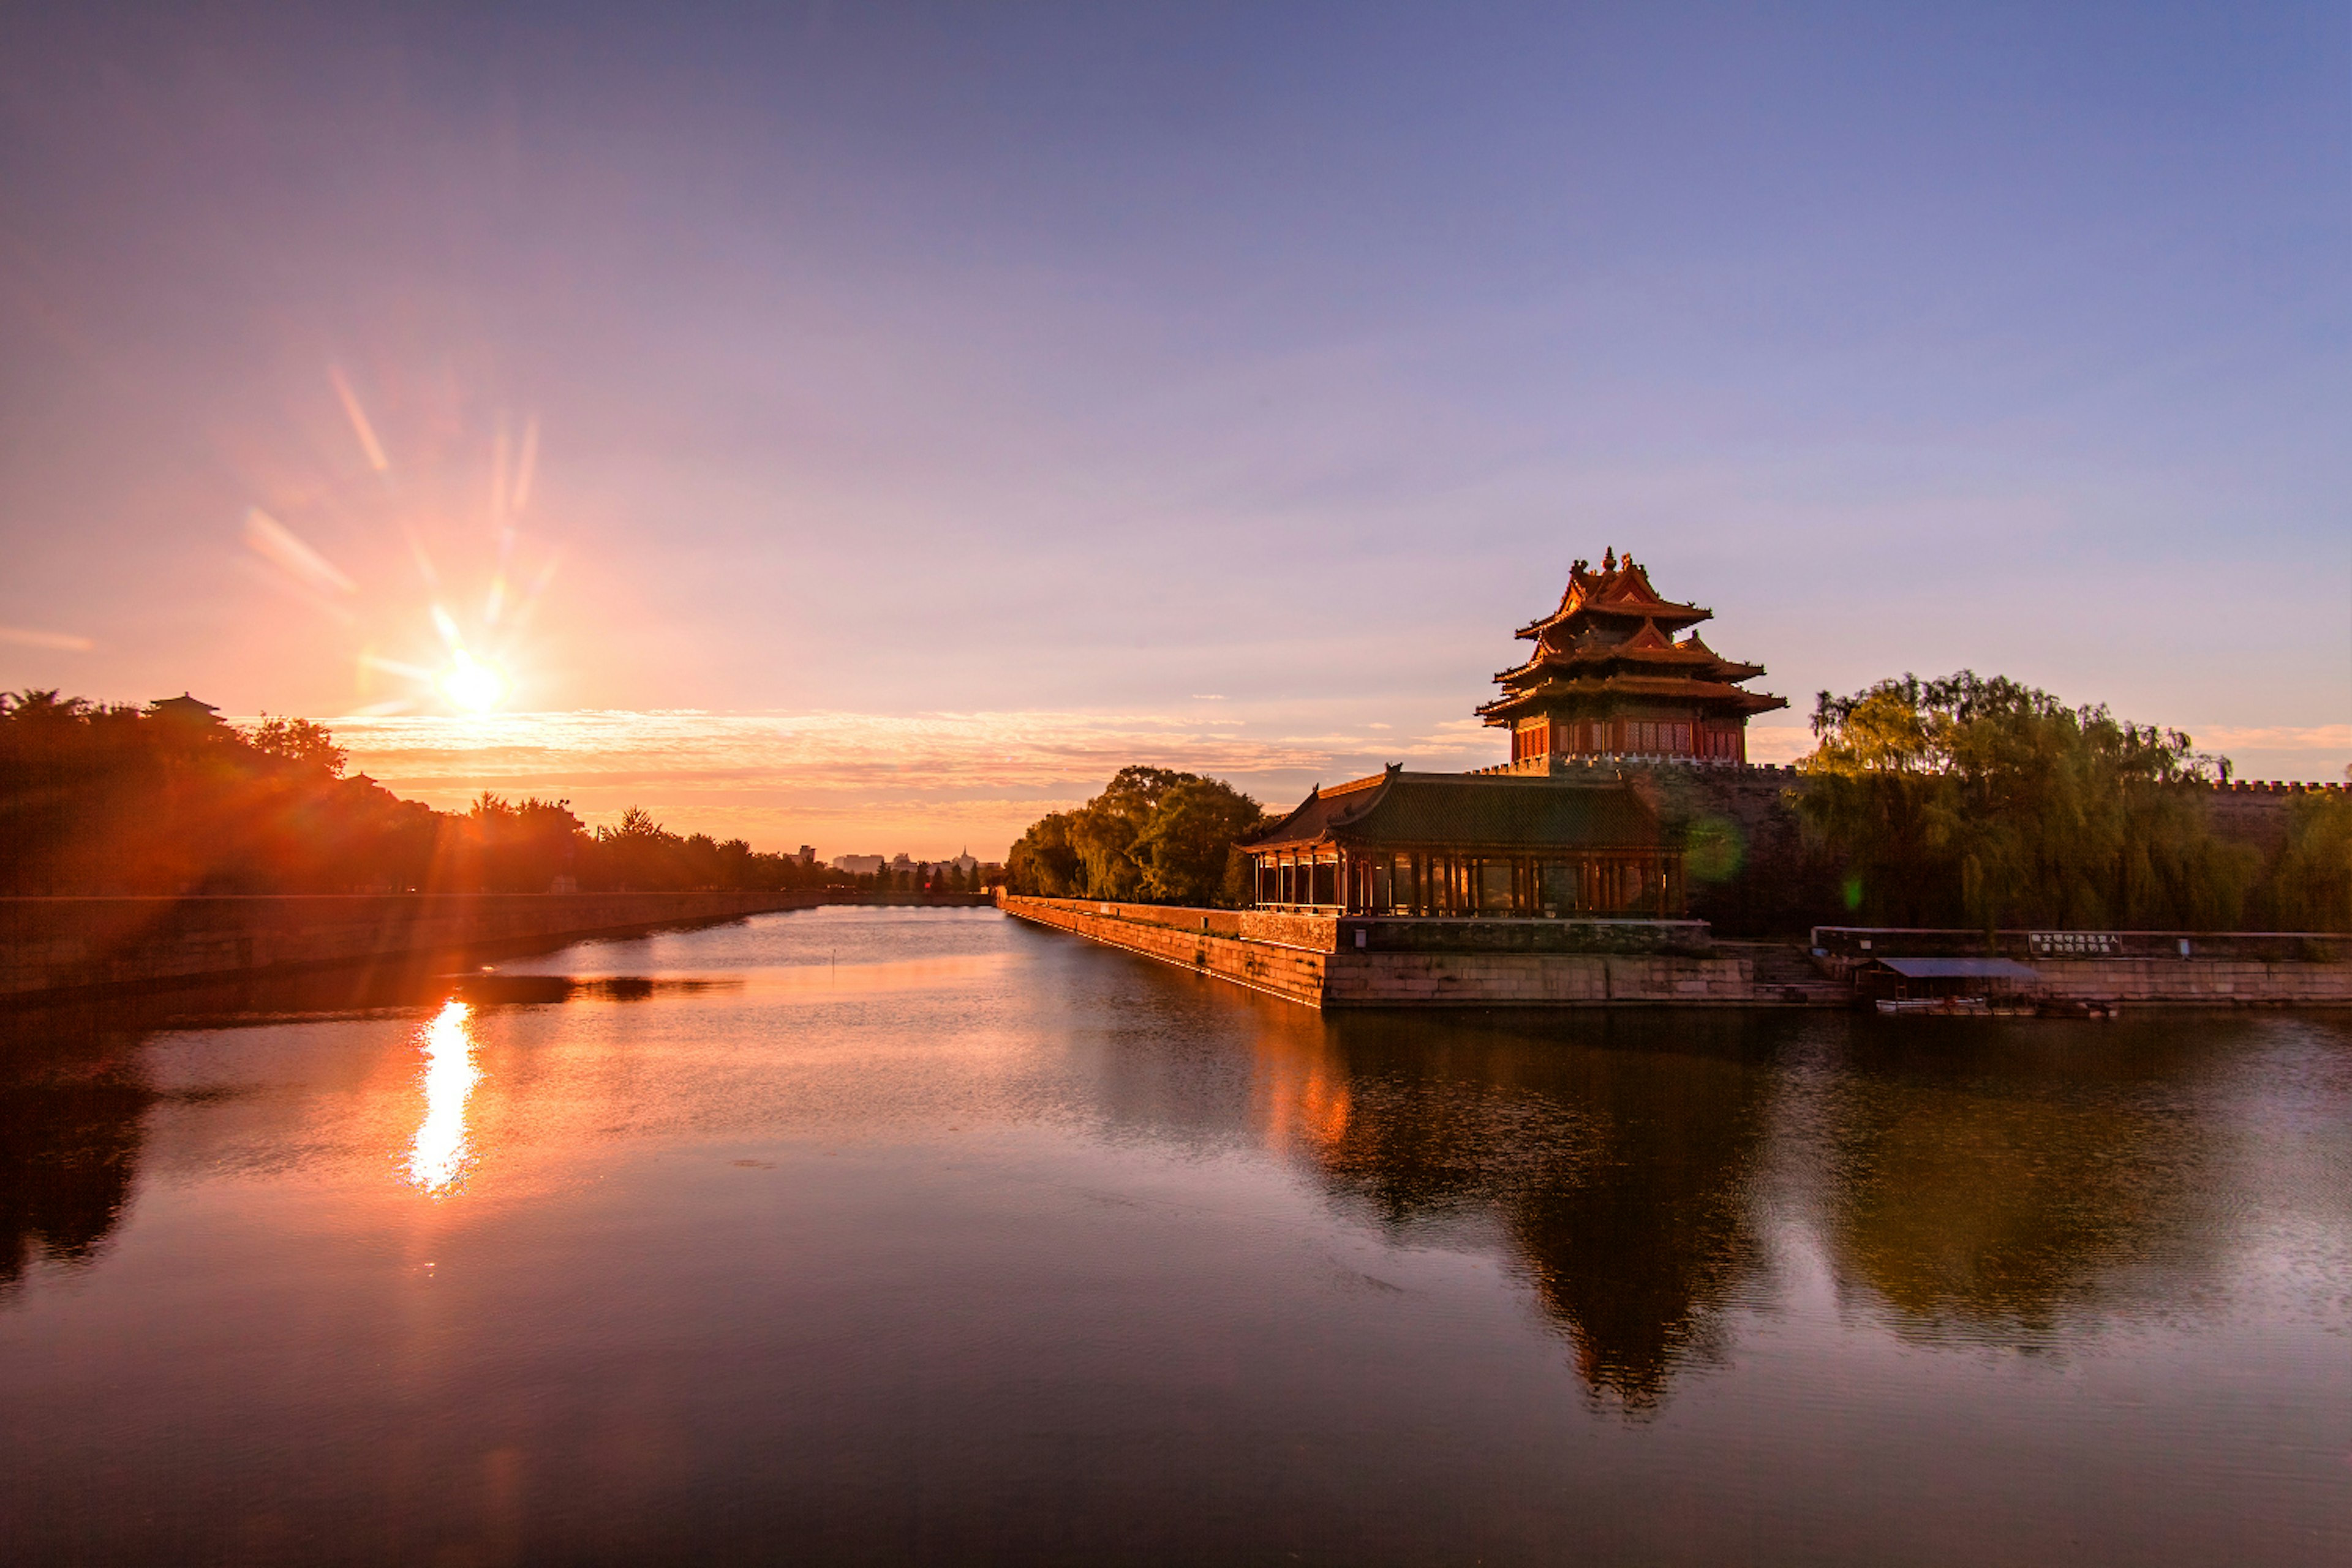 Perfect cheap sundowner: wine along the Forbidden City's moat. Image by CZQS2000 / STS / Getty